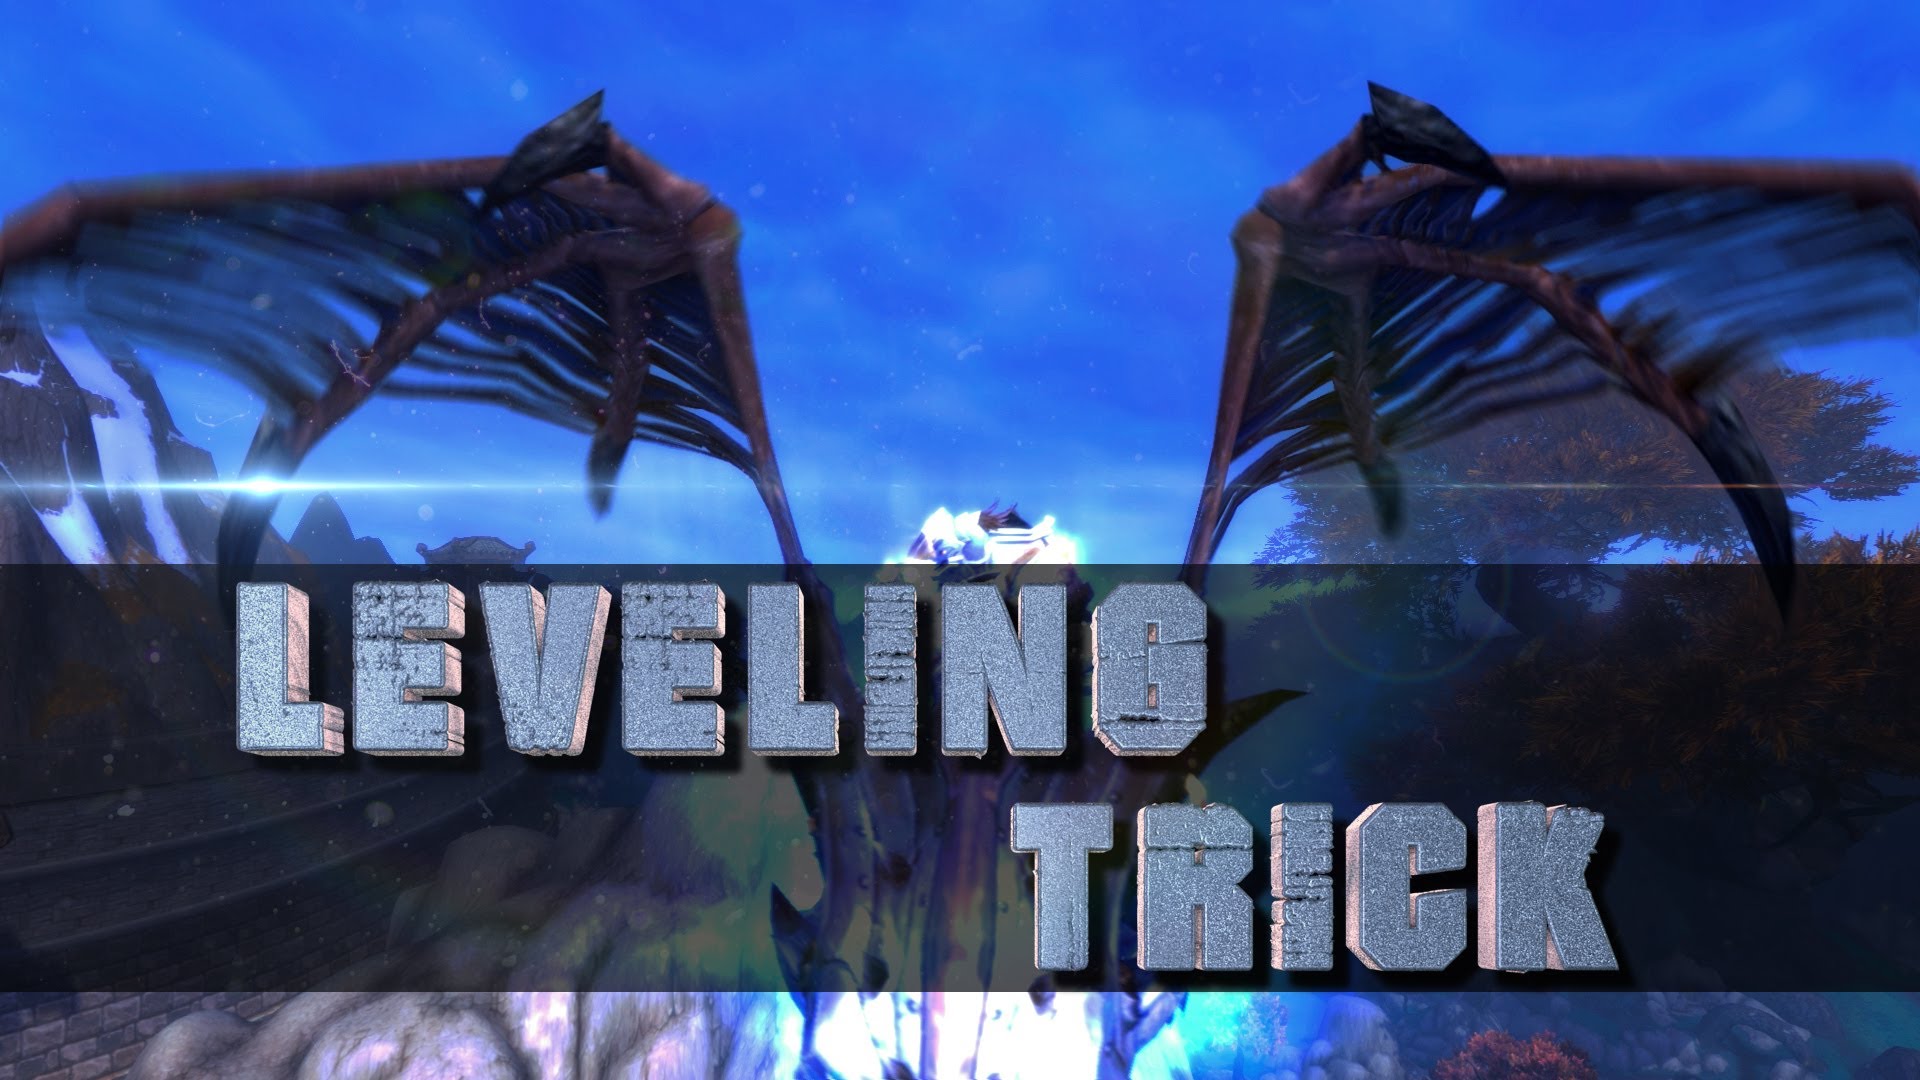 [Psynaps] WoW Leveling Trick and Just Hit Lvl 90 Sylvanas EU